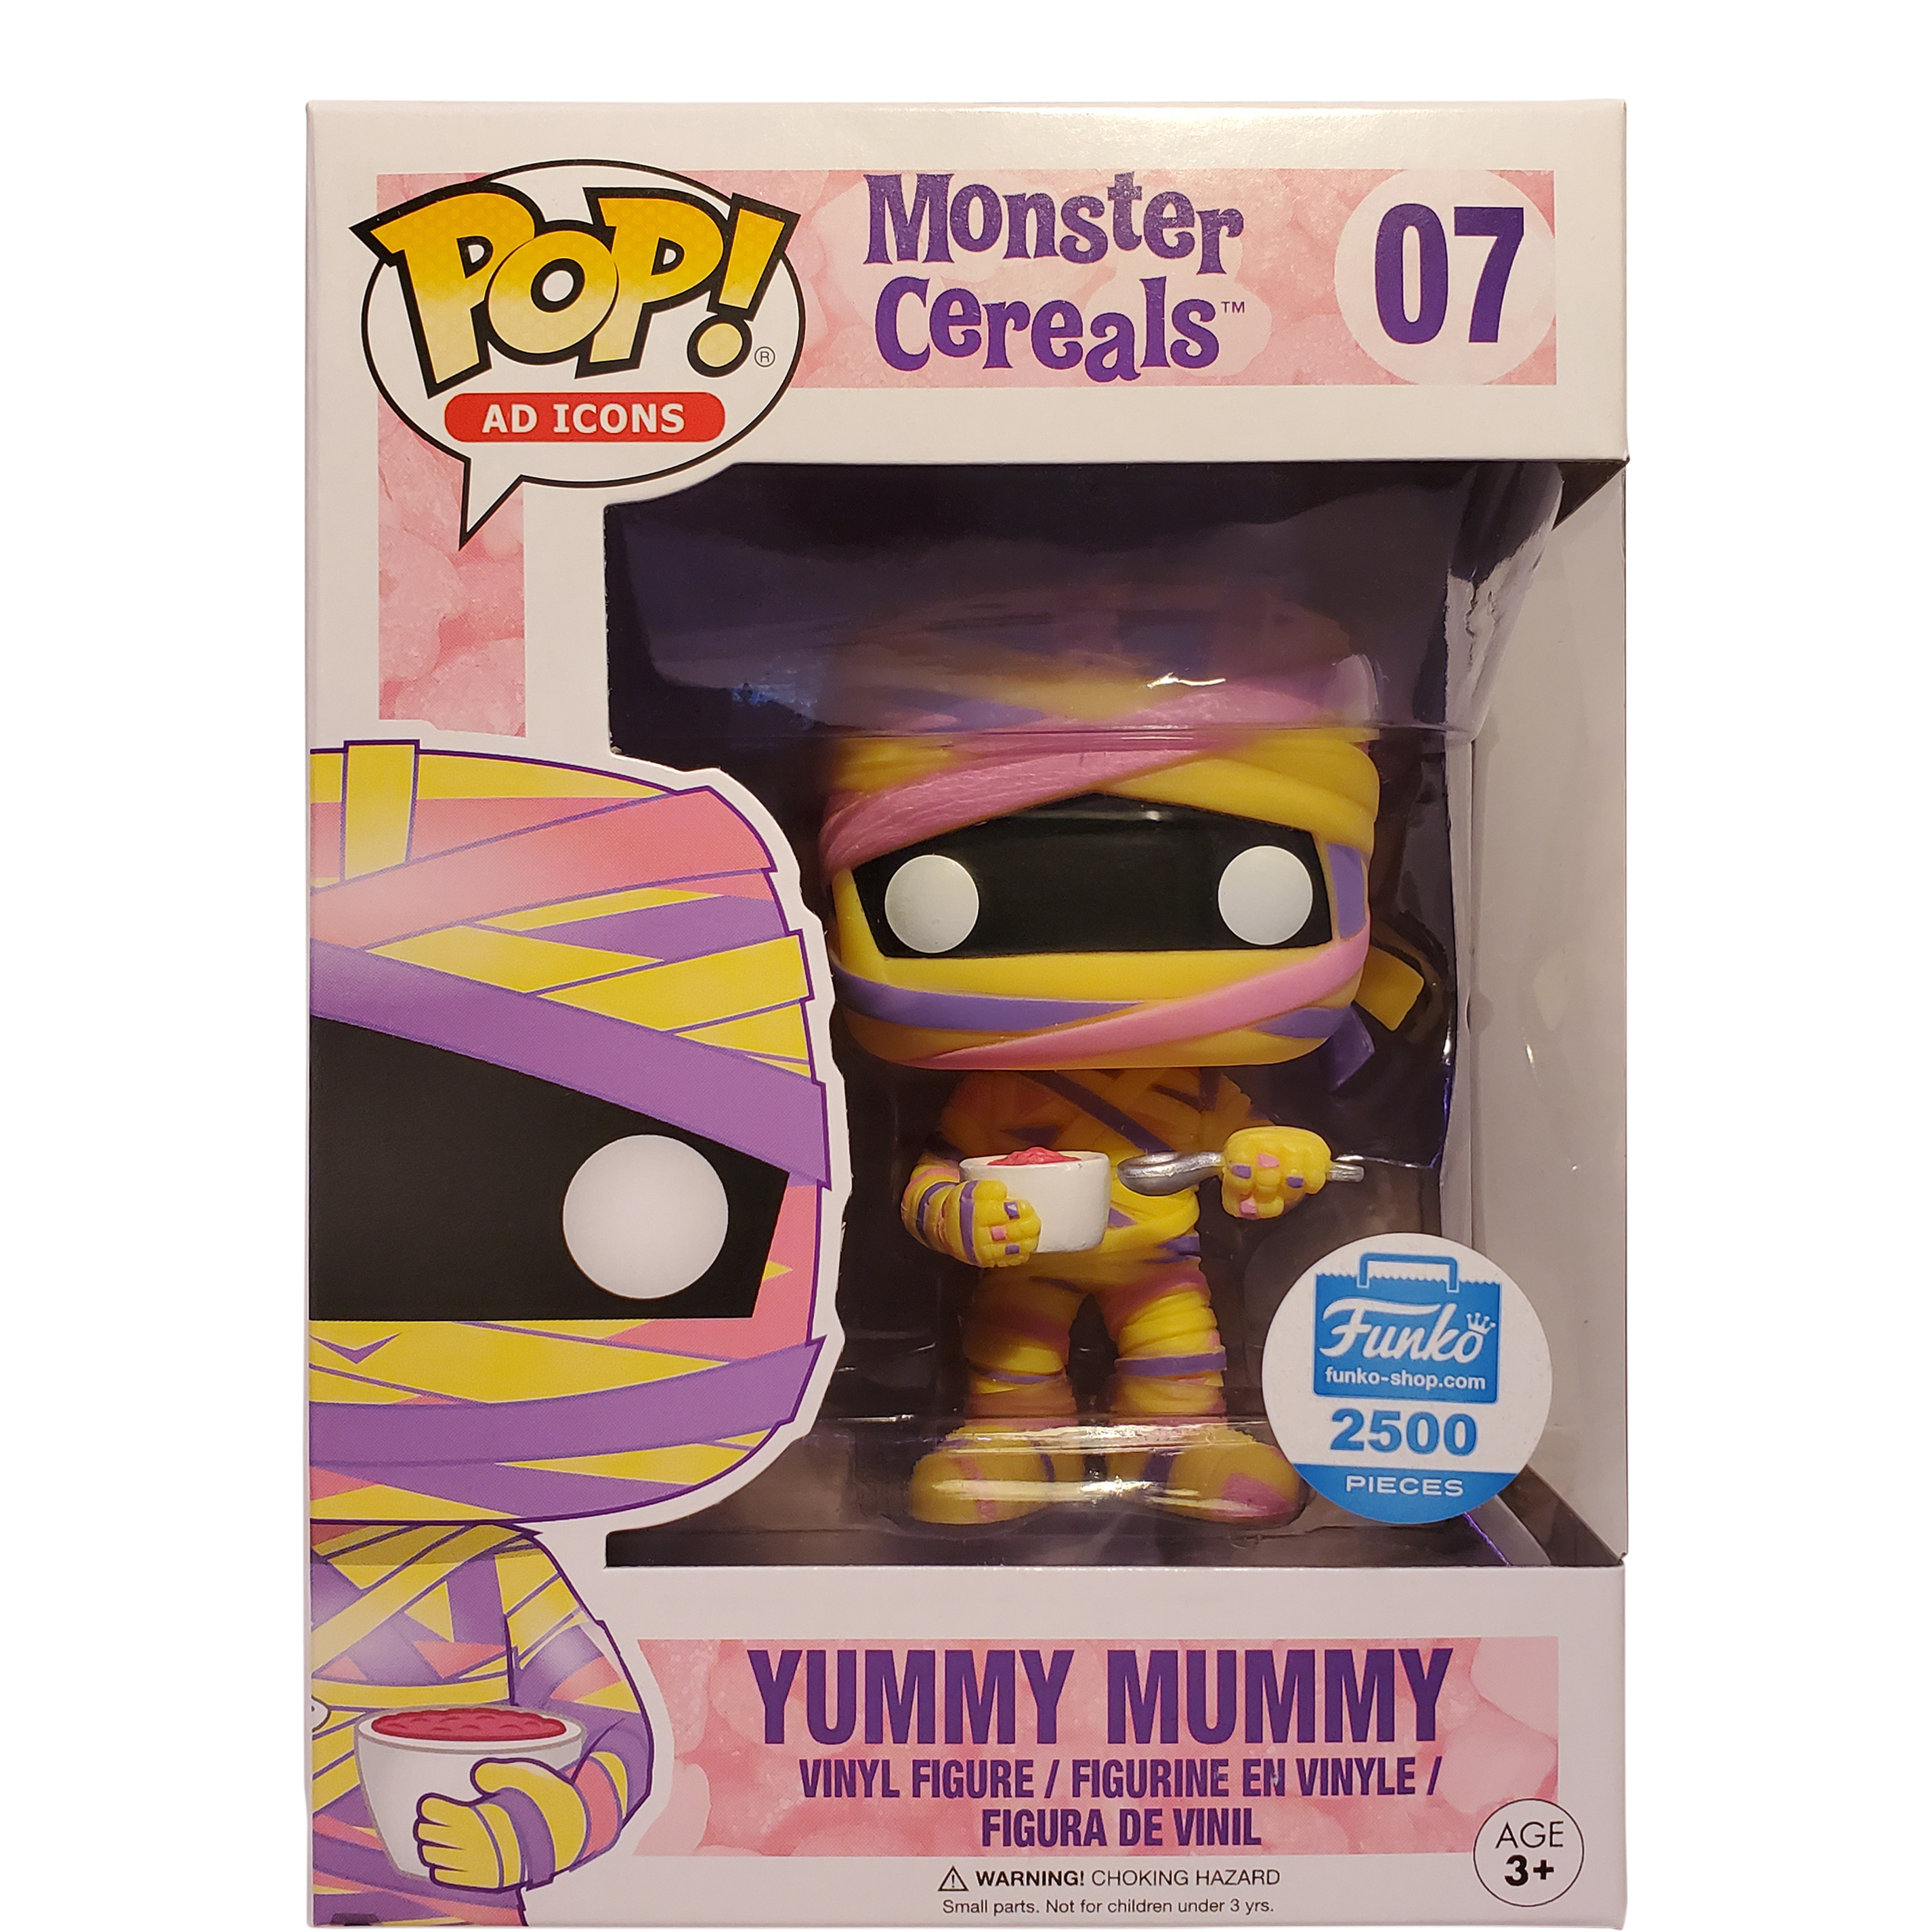 Funko Pop! Ad Icons Monster Cereals Yummy Mummy Funko Shop 